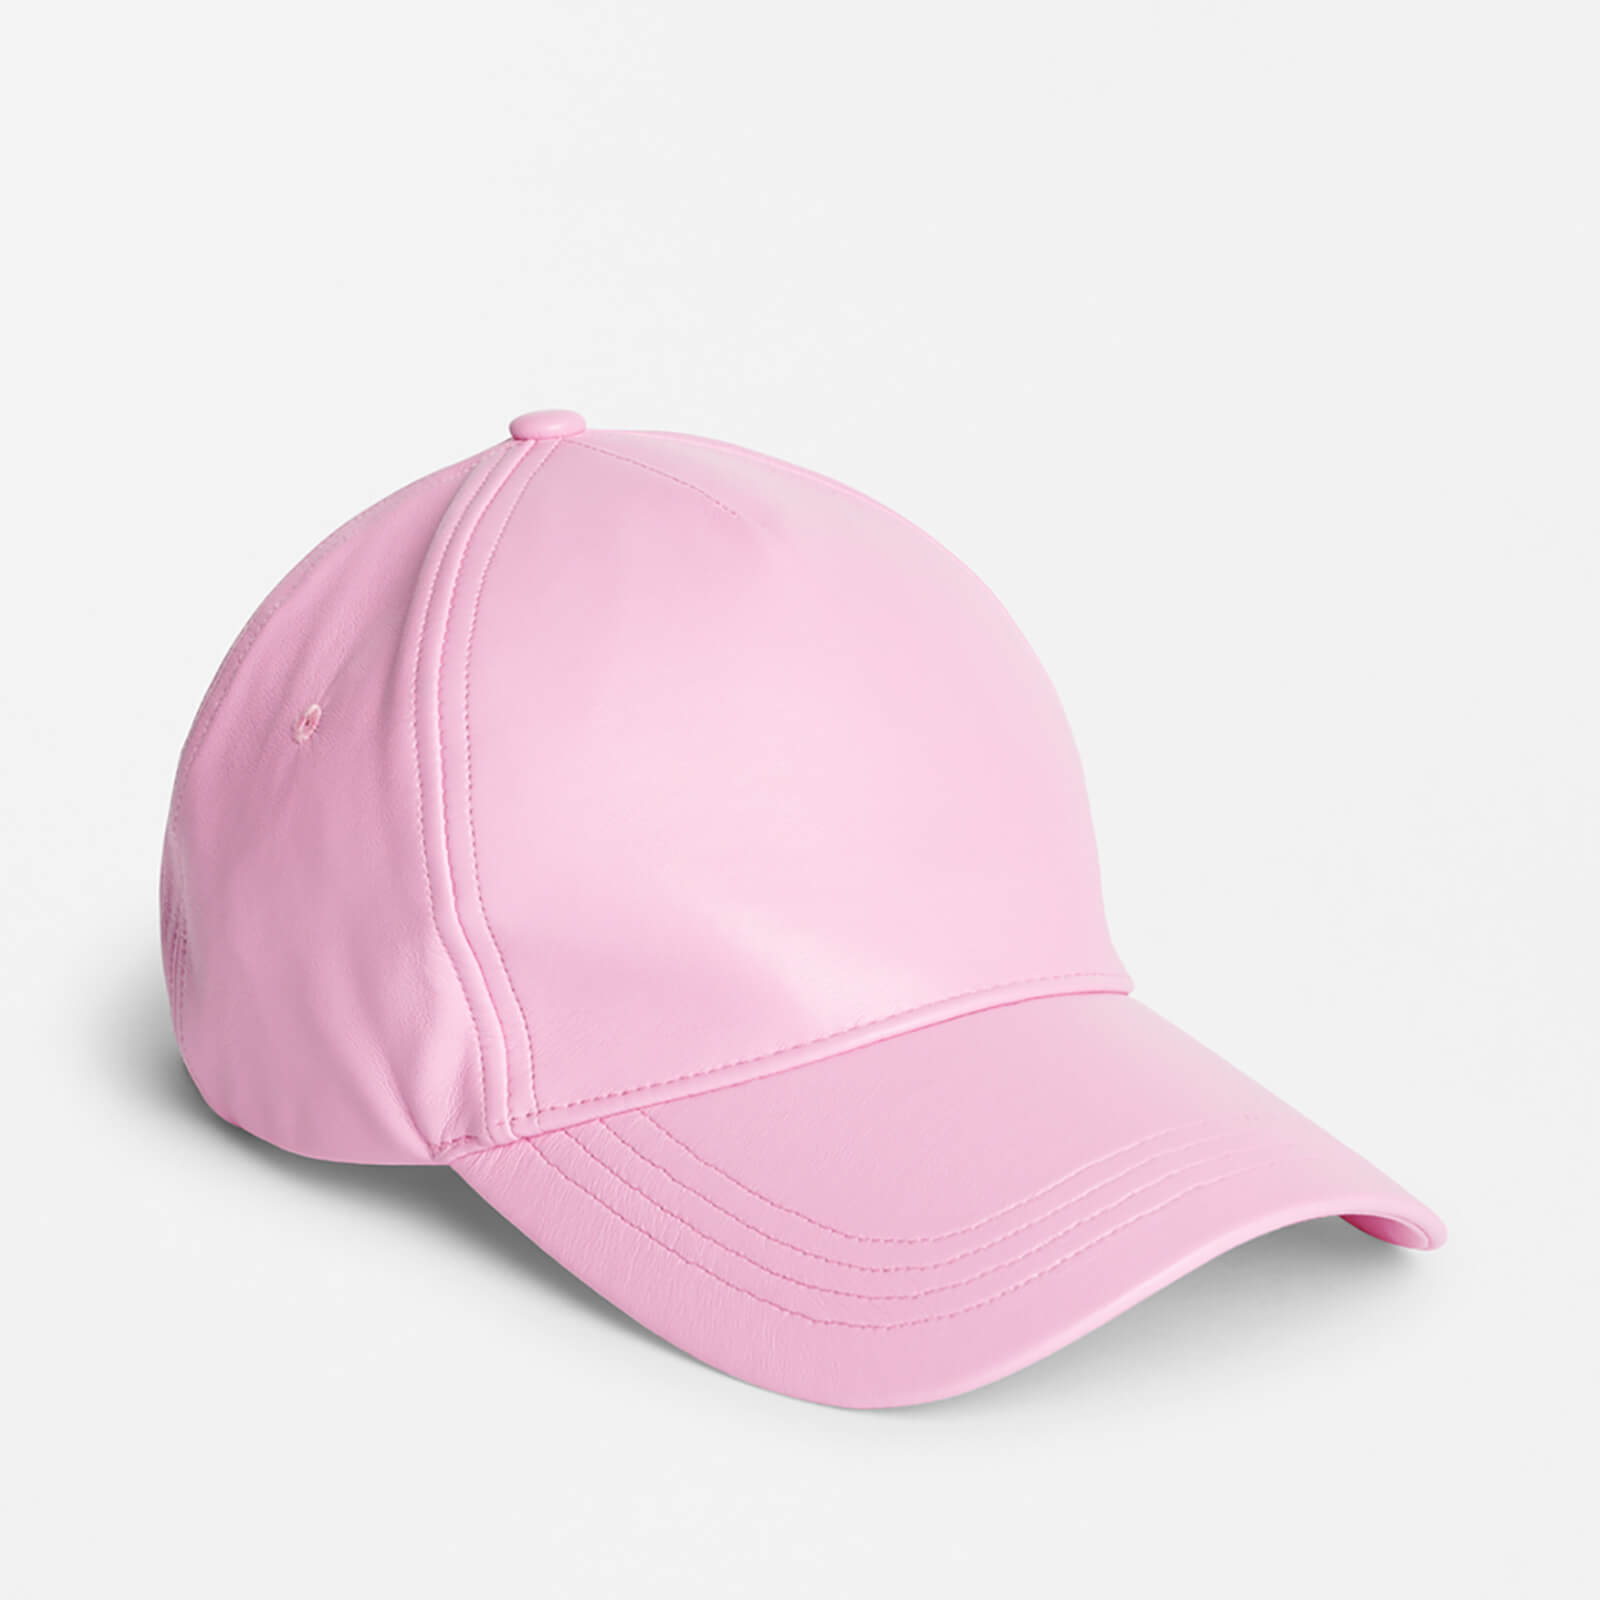 stand studio connie faux leather baseball cap rosa